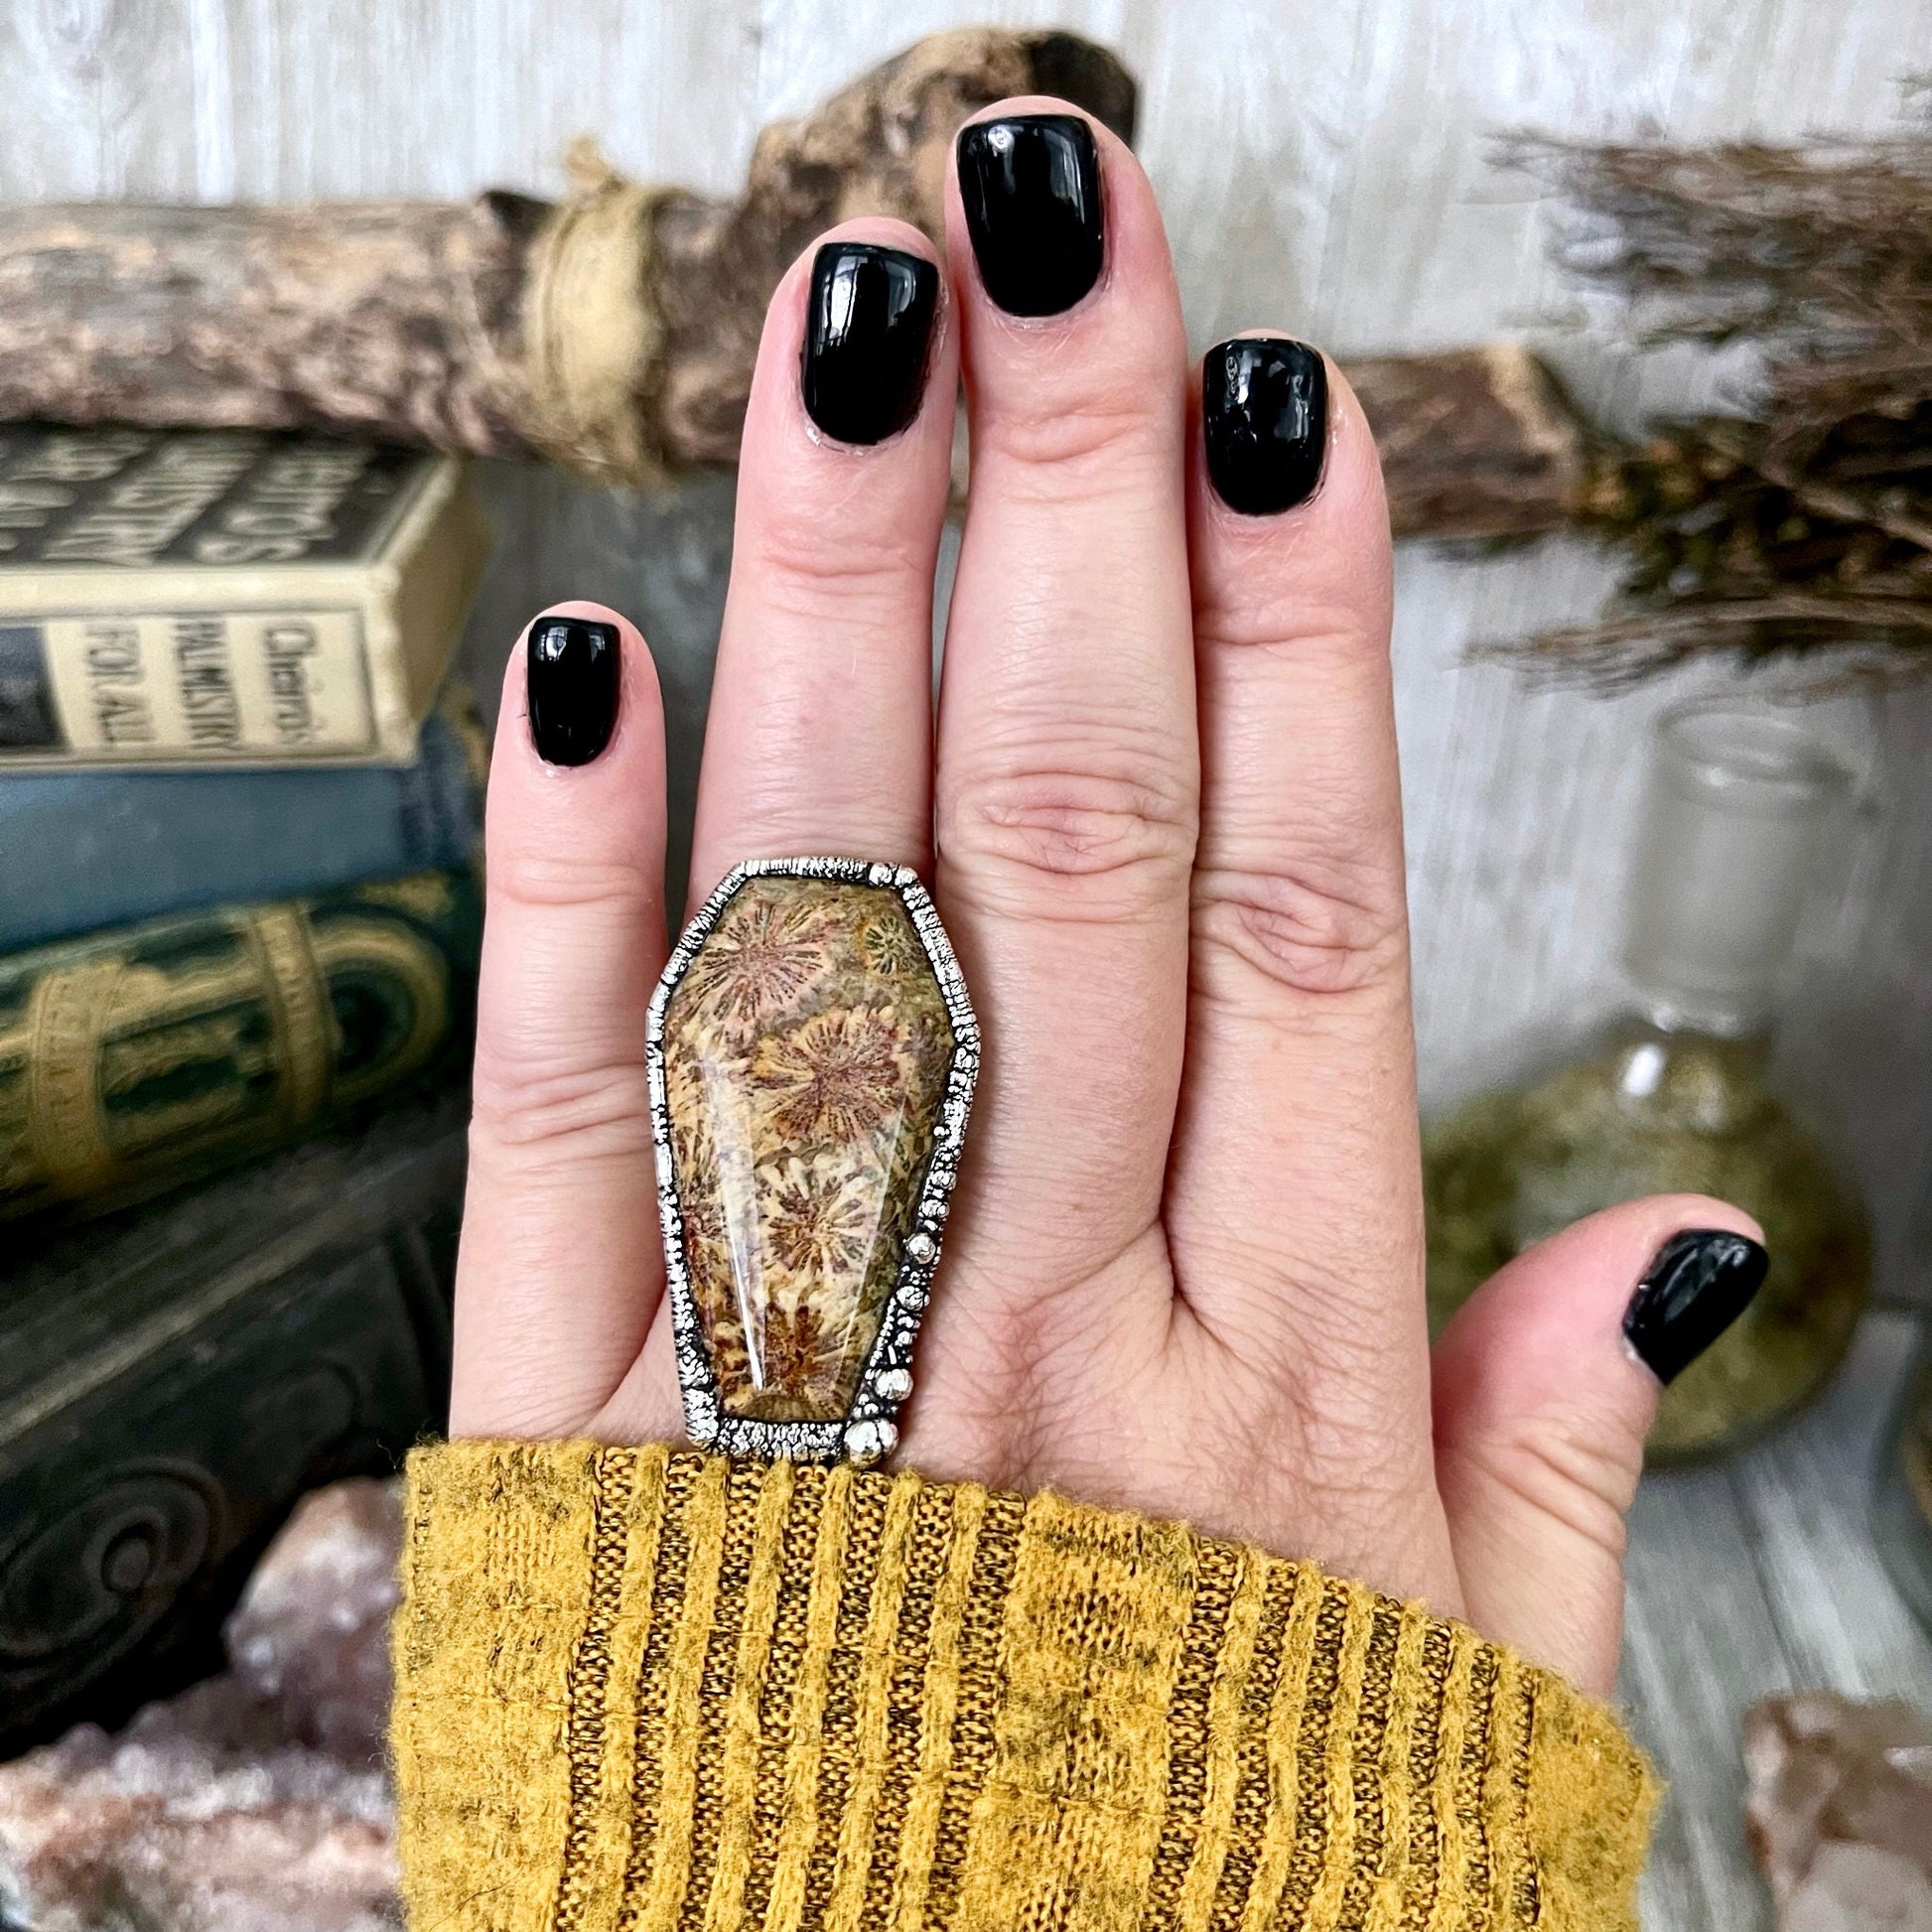 Size 8 Large Fossilized Coral Coffin Statement Ring in Fine Silver / Foxlark Collection - One of a Kind - Foxlark Crystal Jewelry